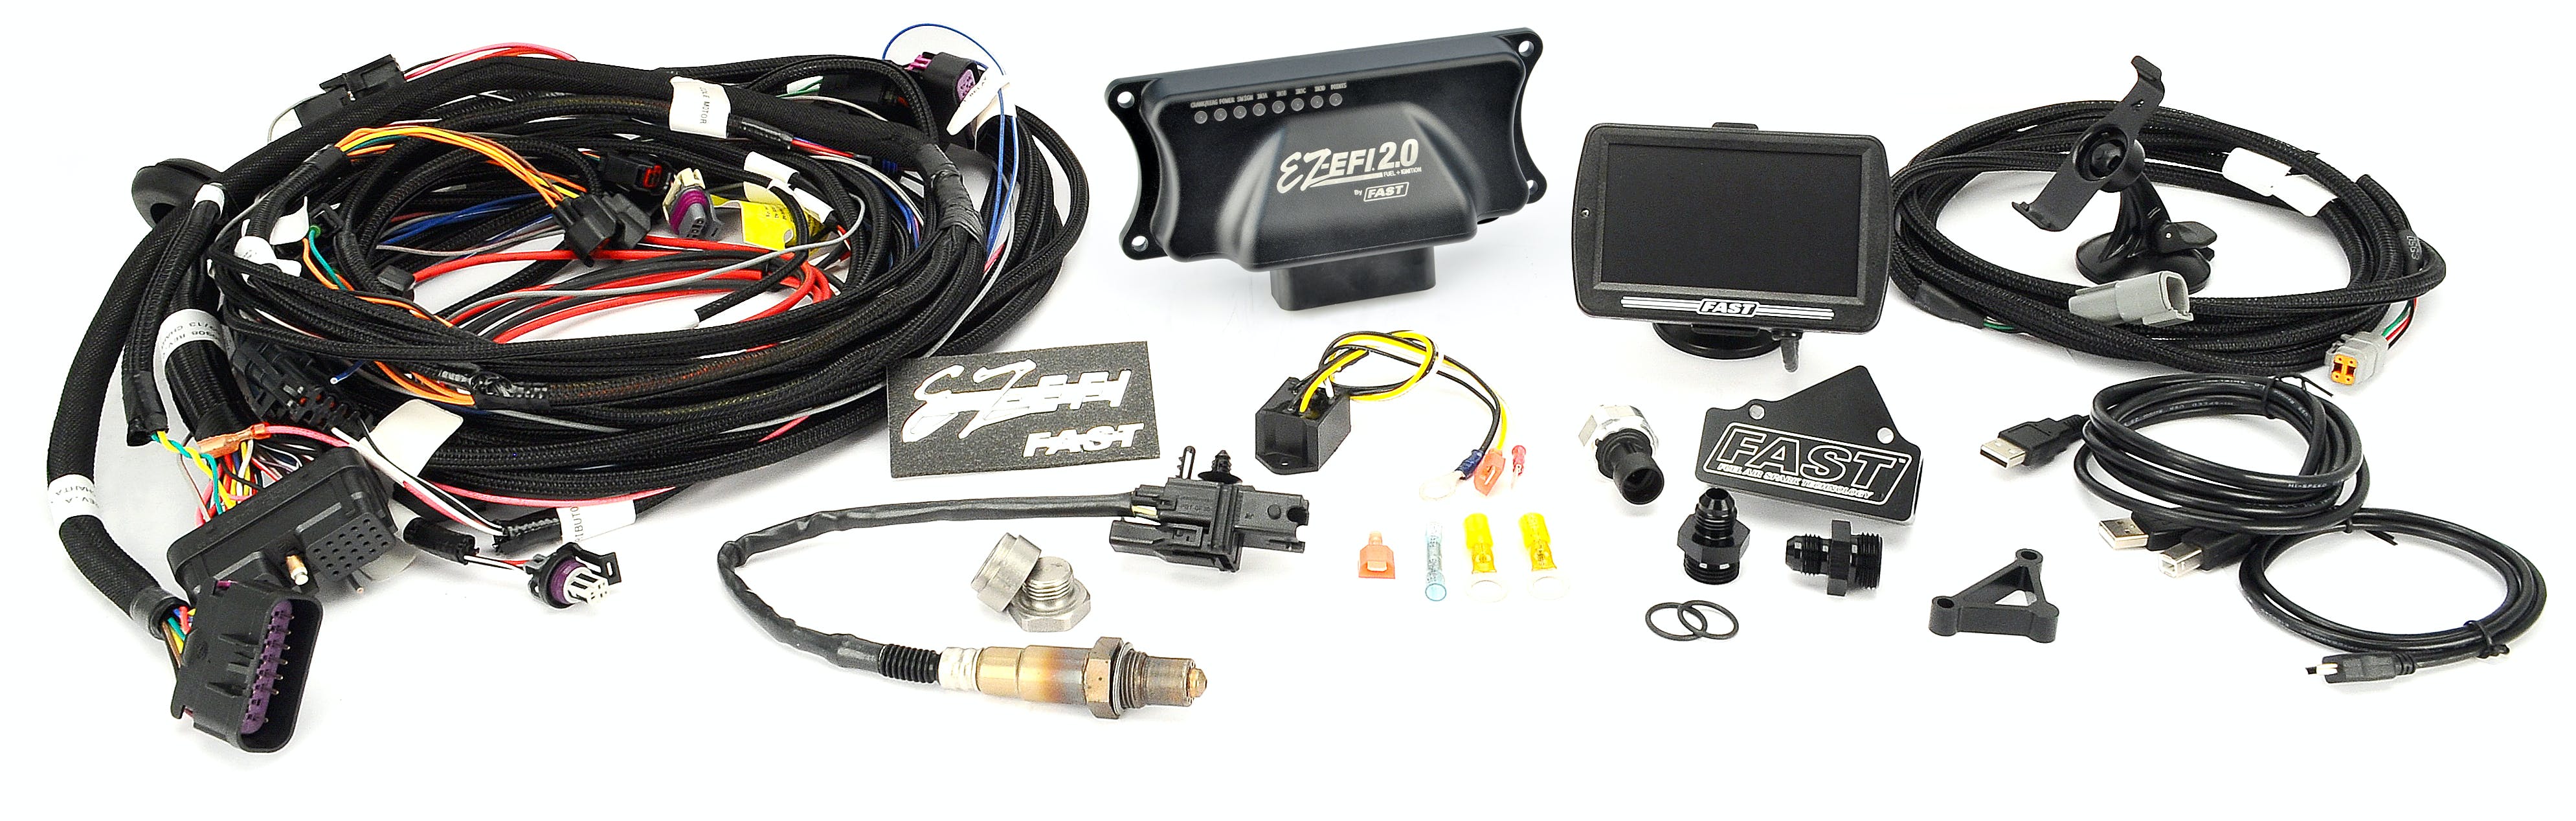 FAST - Fuel Air Spark Technology 30404-KIT EZ 2.0 Base Kit with Touchscreen and Multiport Harness